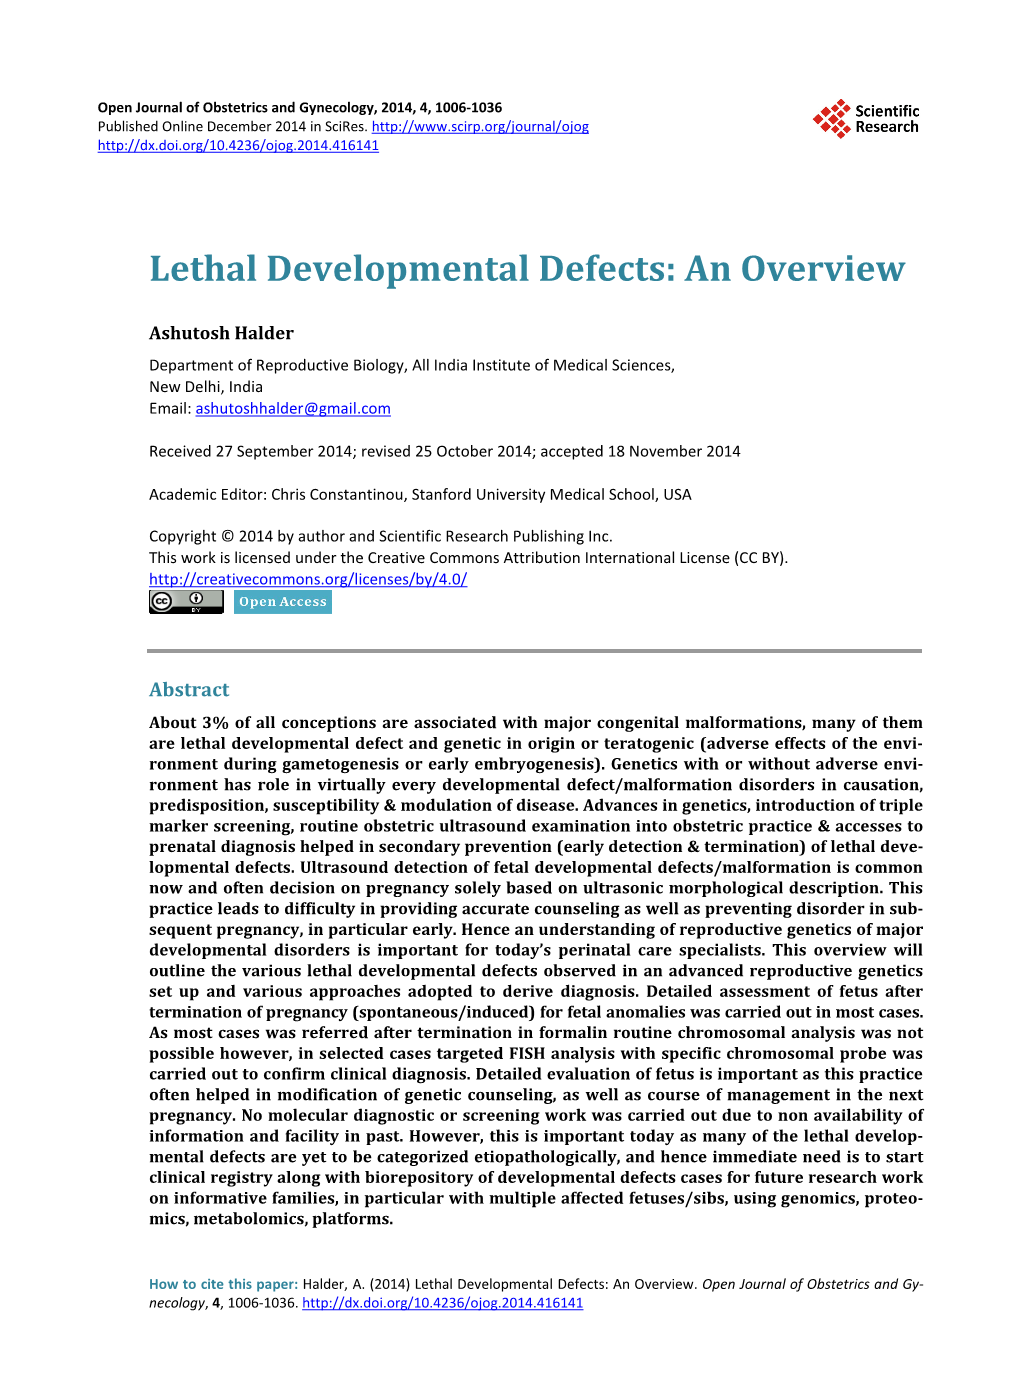 Lethal Developmental Defects: an Overview